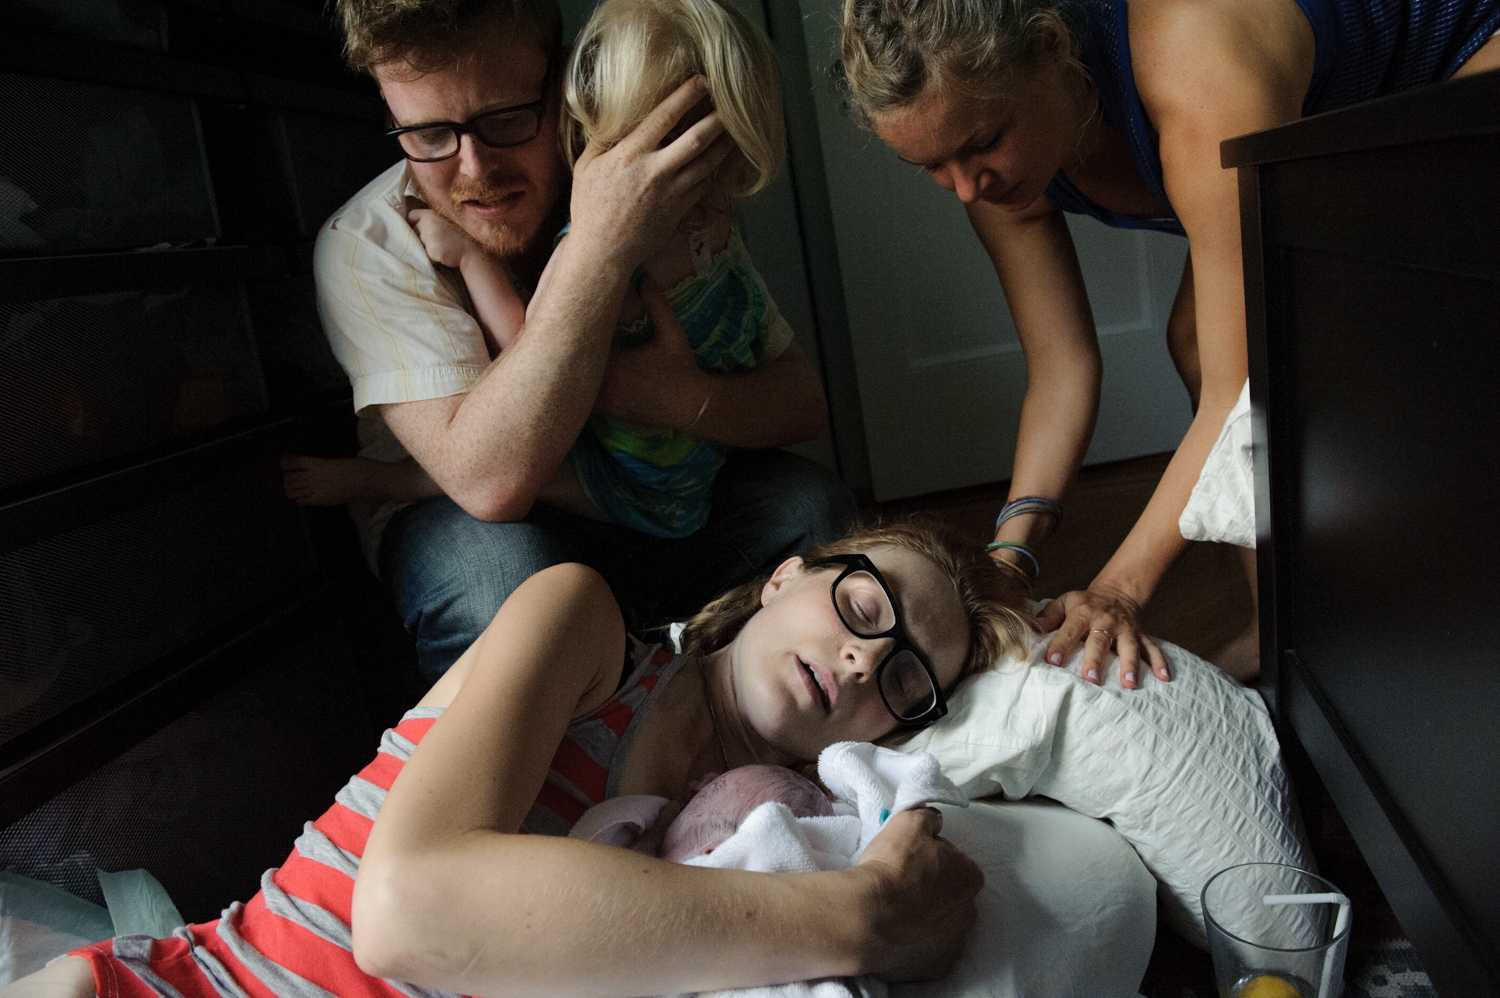 Scene of a home birth with mother, family, and newborn